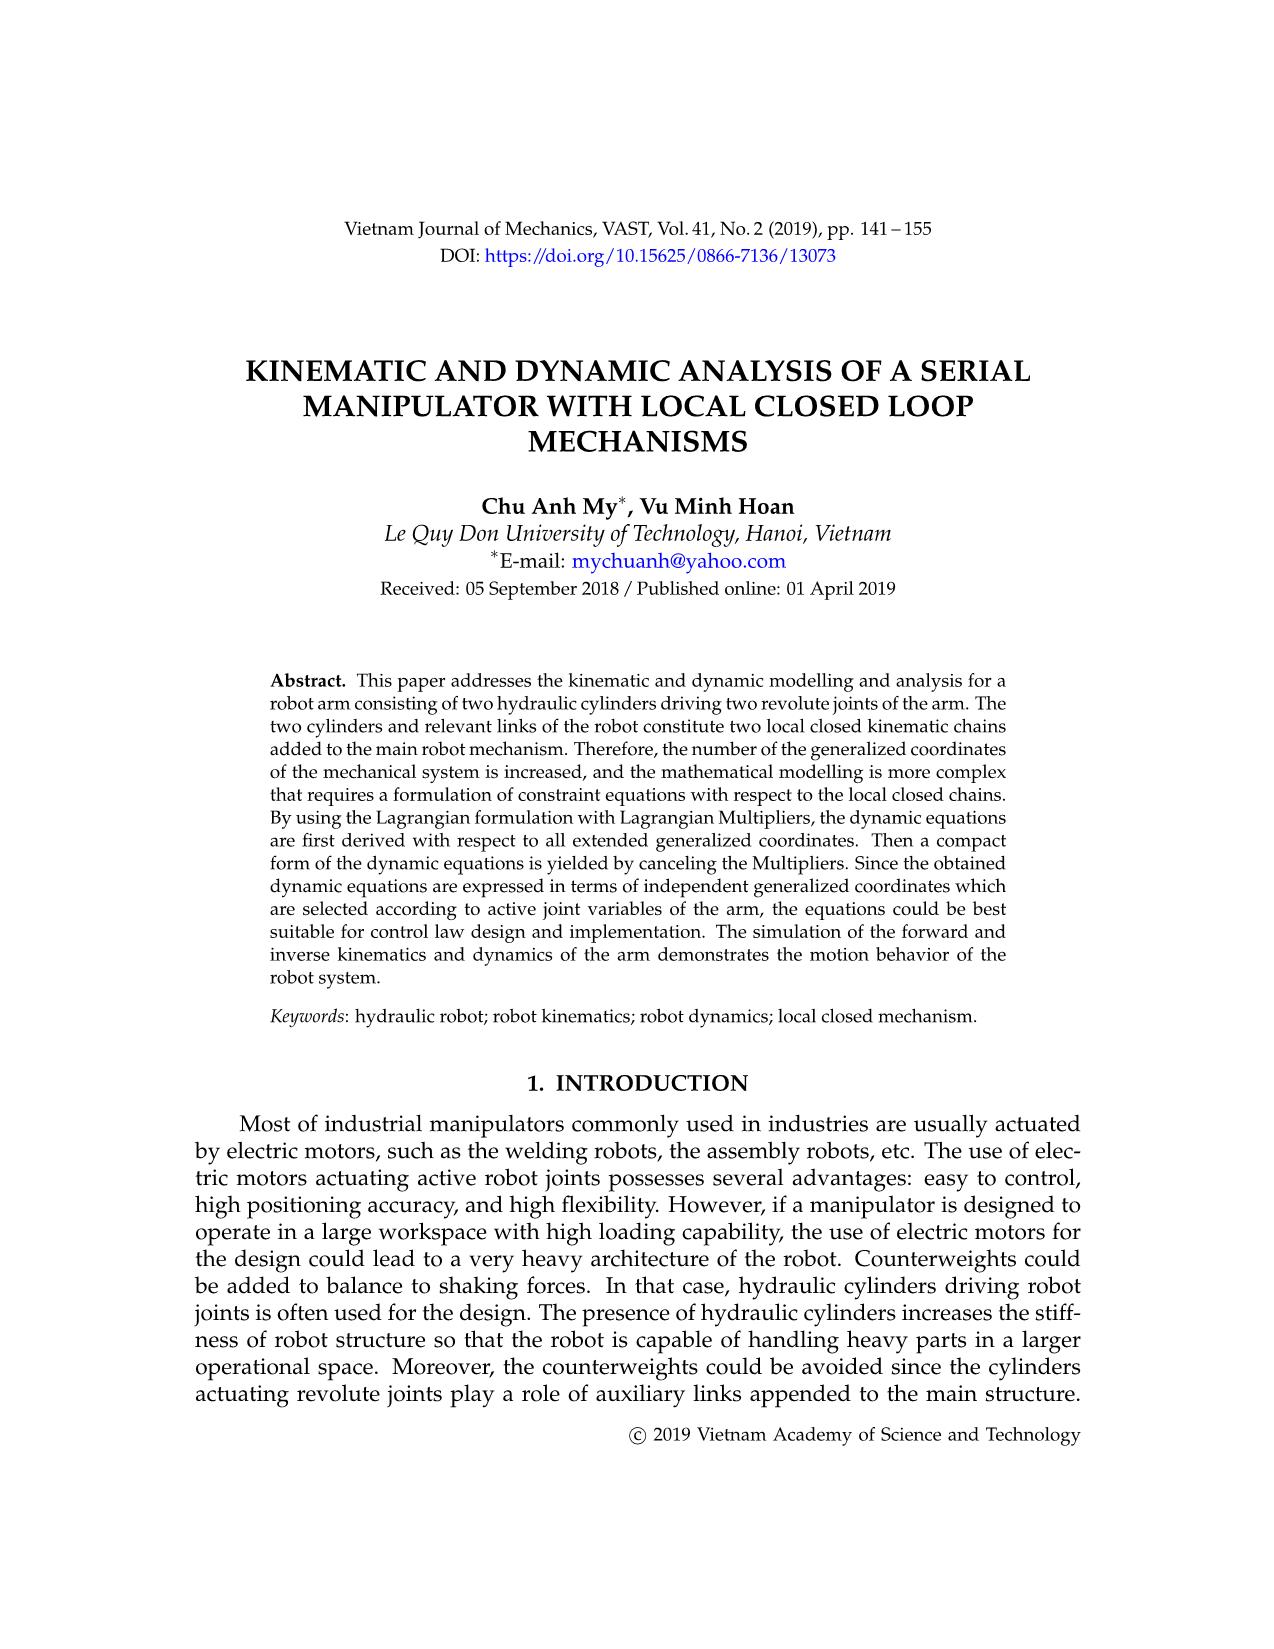 Kinematic and dynamic analysis of a serial manipulator with local closed loop mechanisms trang 1